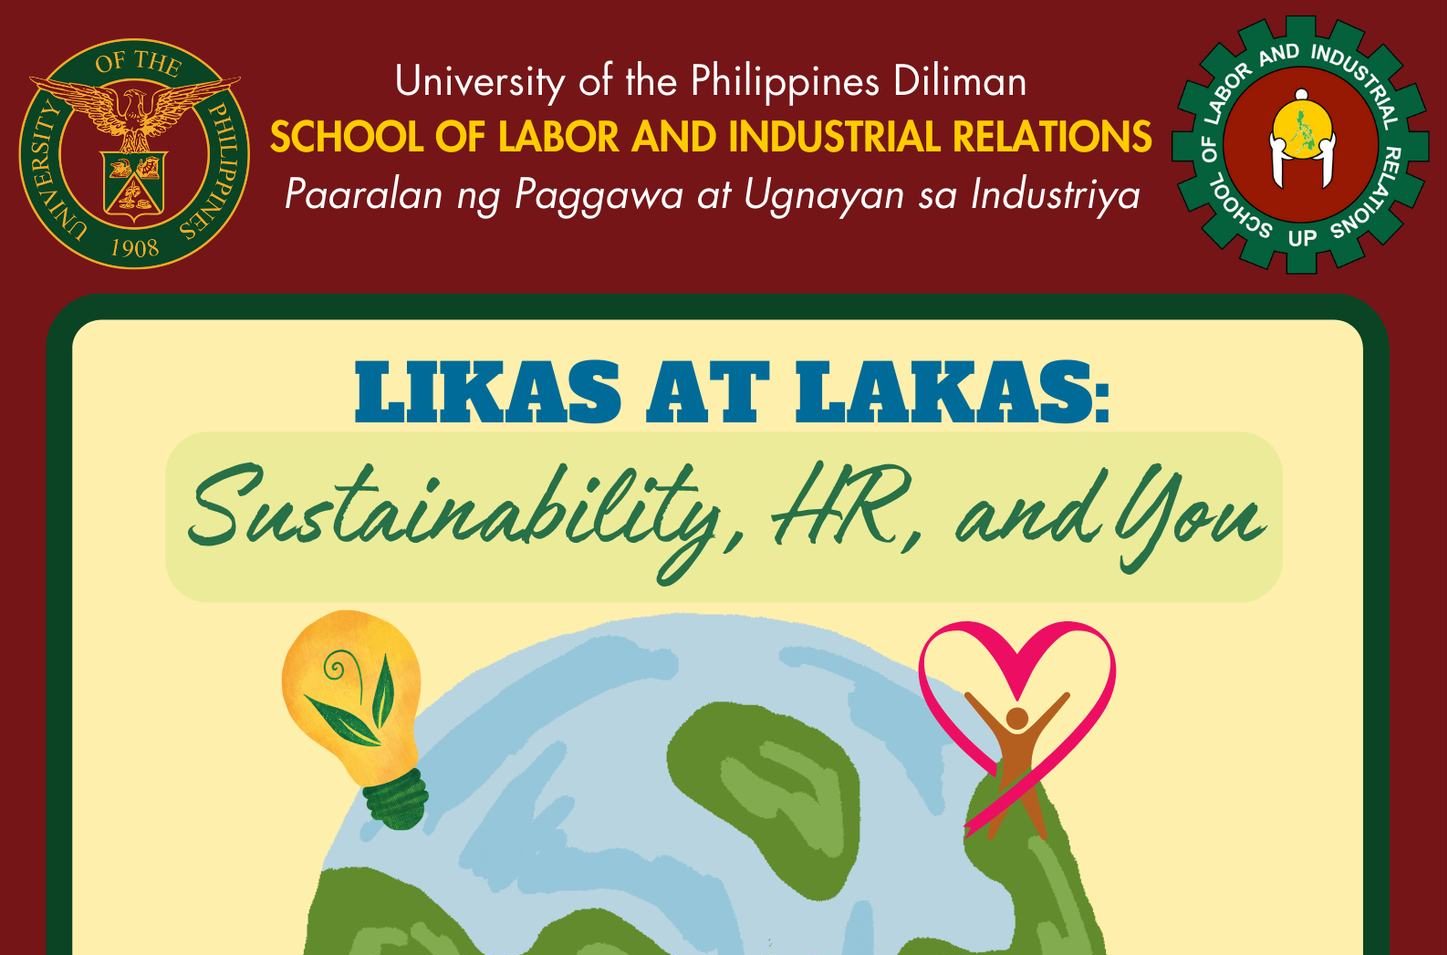 Likas at Lakas: Sustainability, HR, and You